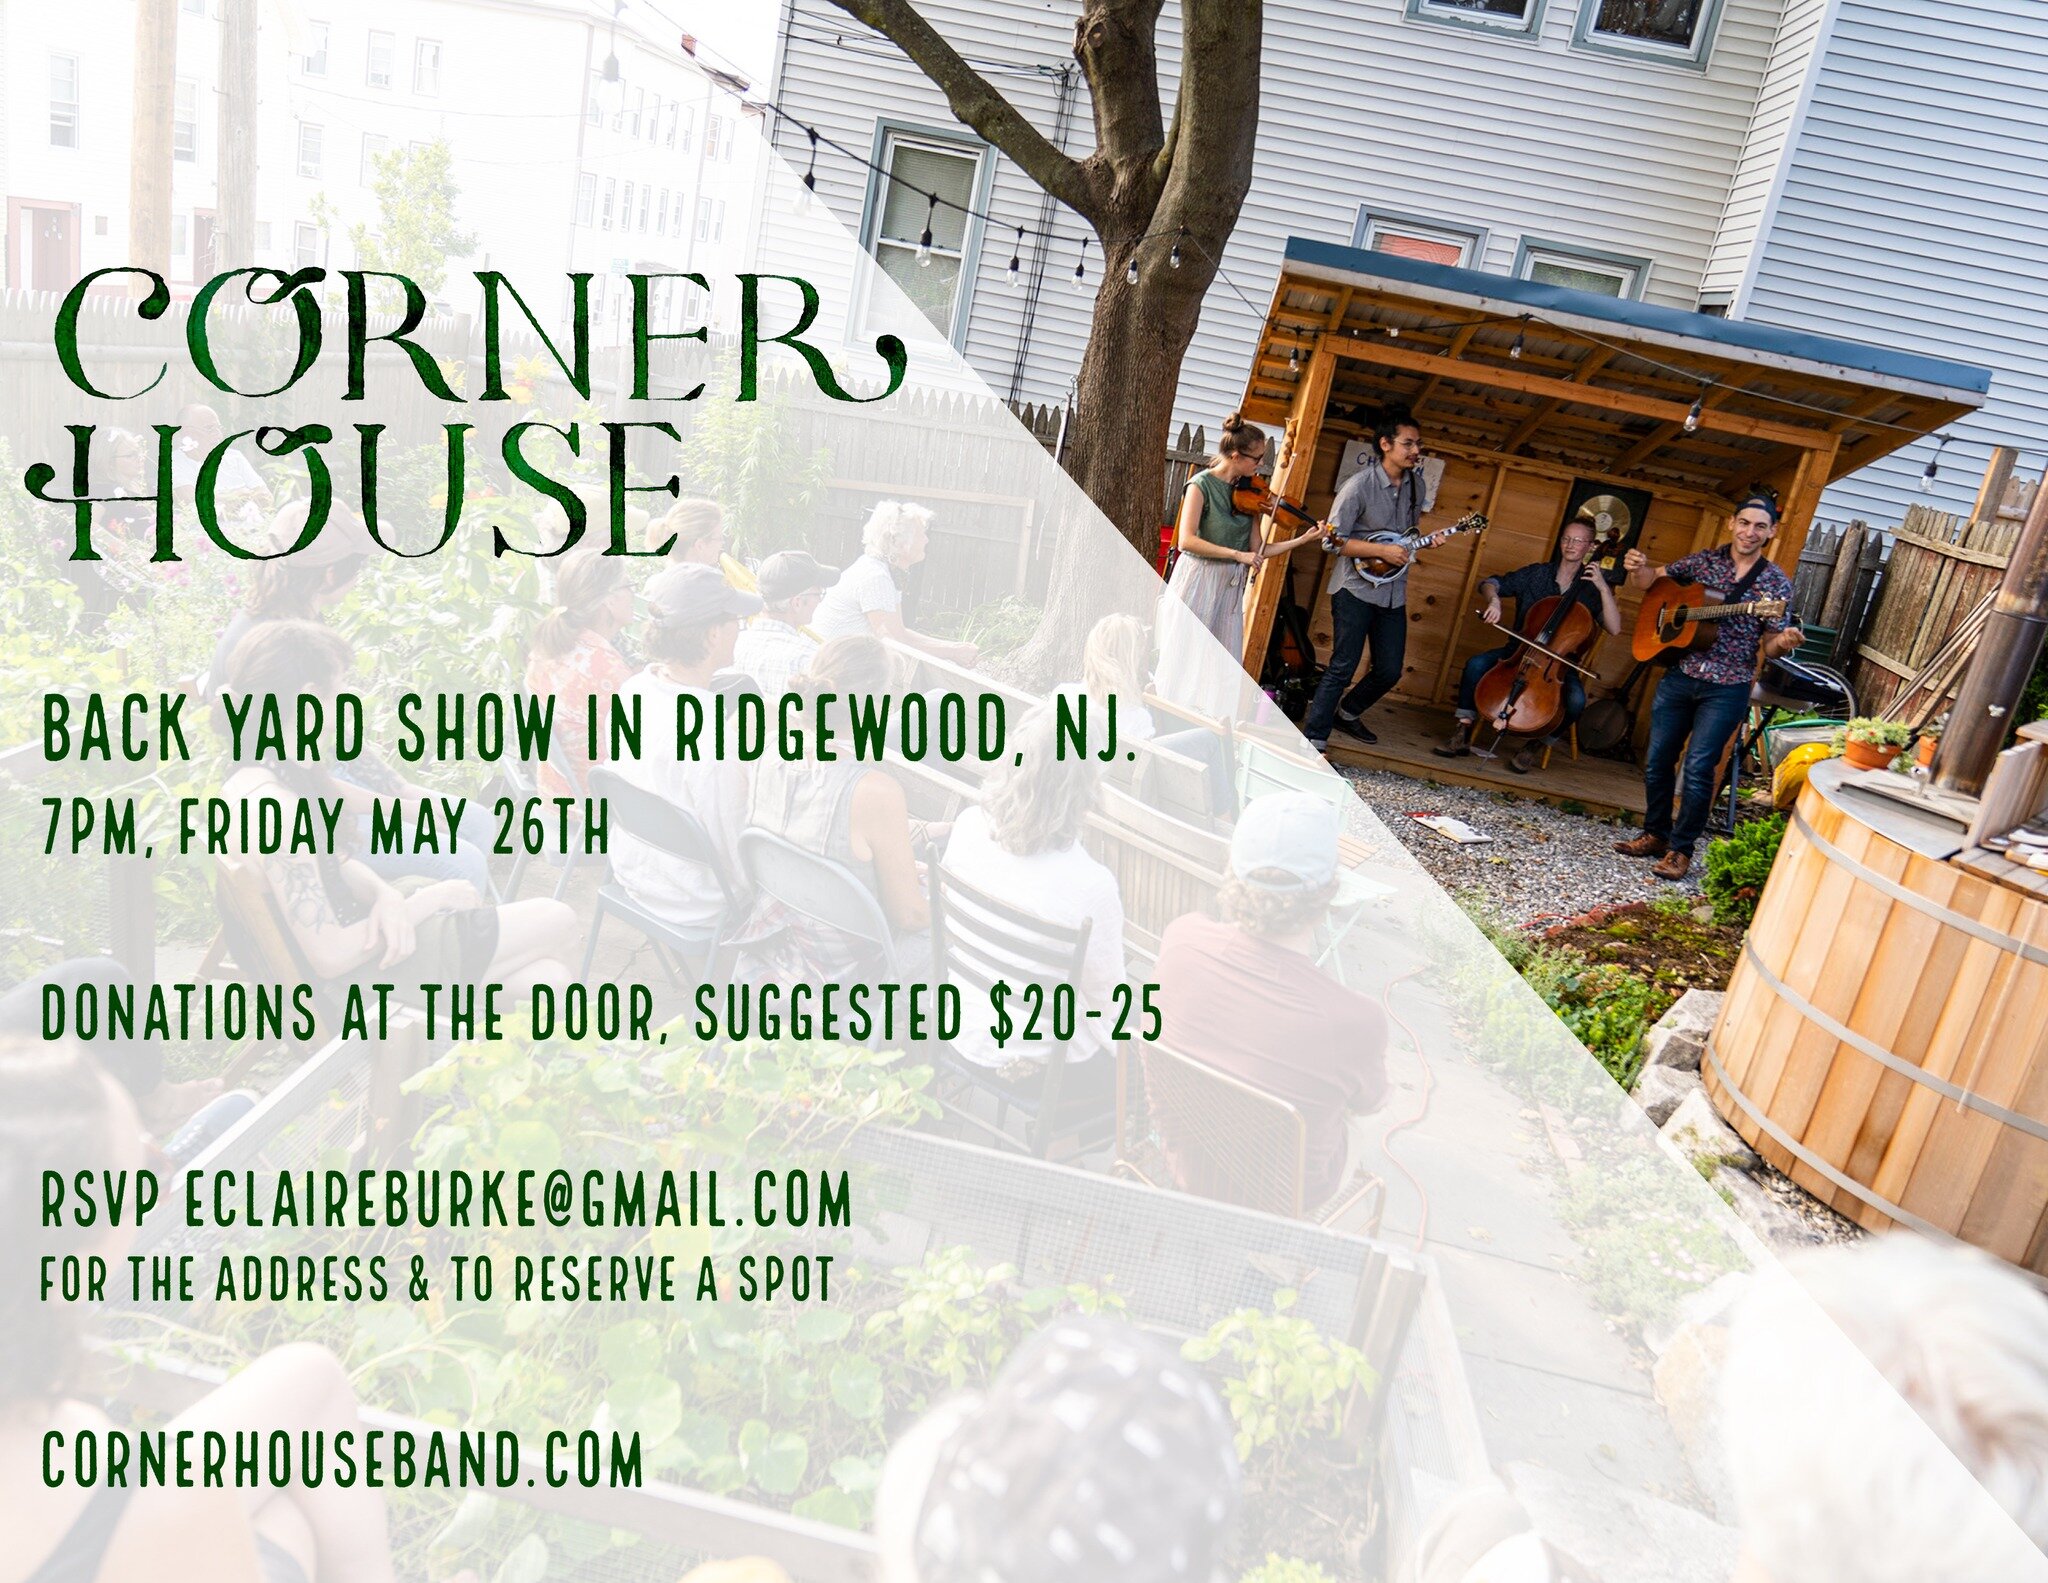 We are delighted to add a show in Ridgewood NJ this Friday! We'll be playing a backyard show, starting at 7pm. Give Elizabeth an email to get the details and reserve a spot: eclaireburke@gmail.com Tell your pals in NJ!